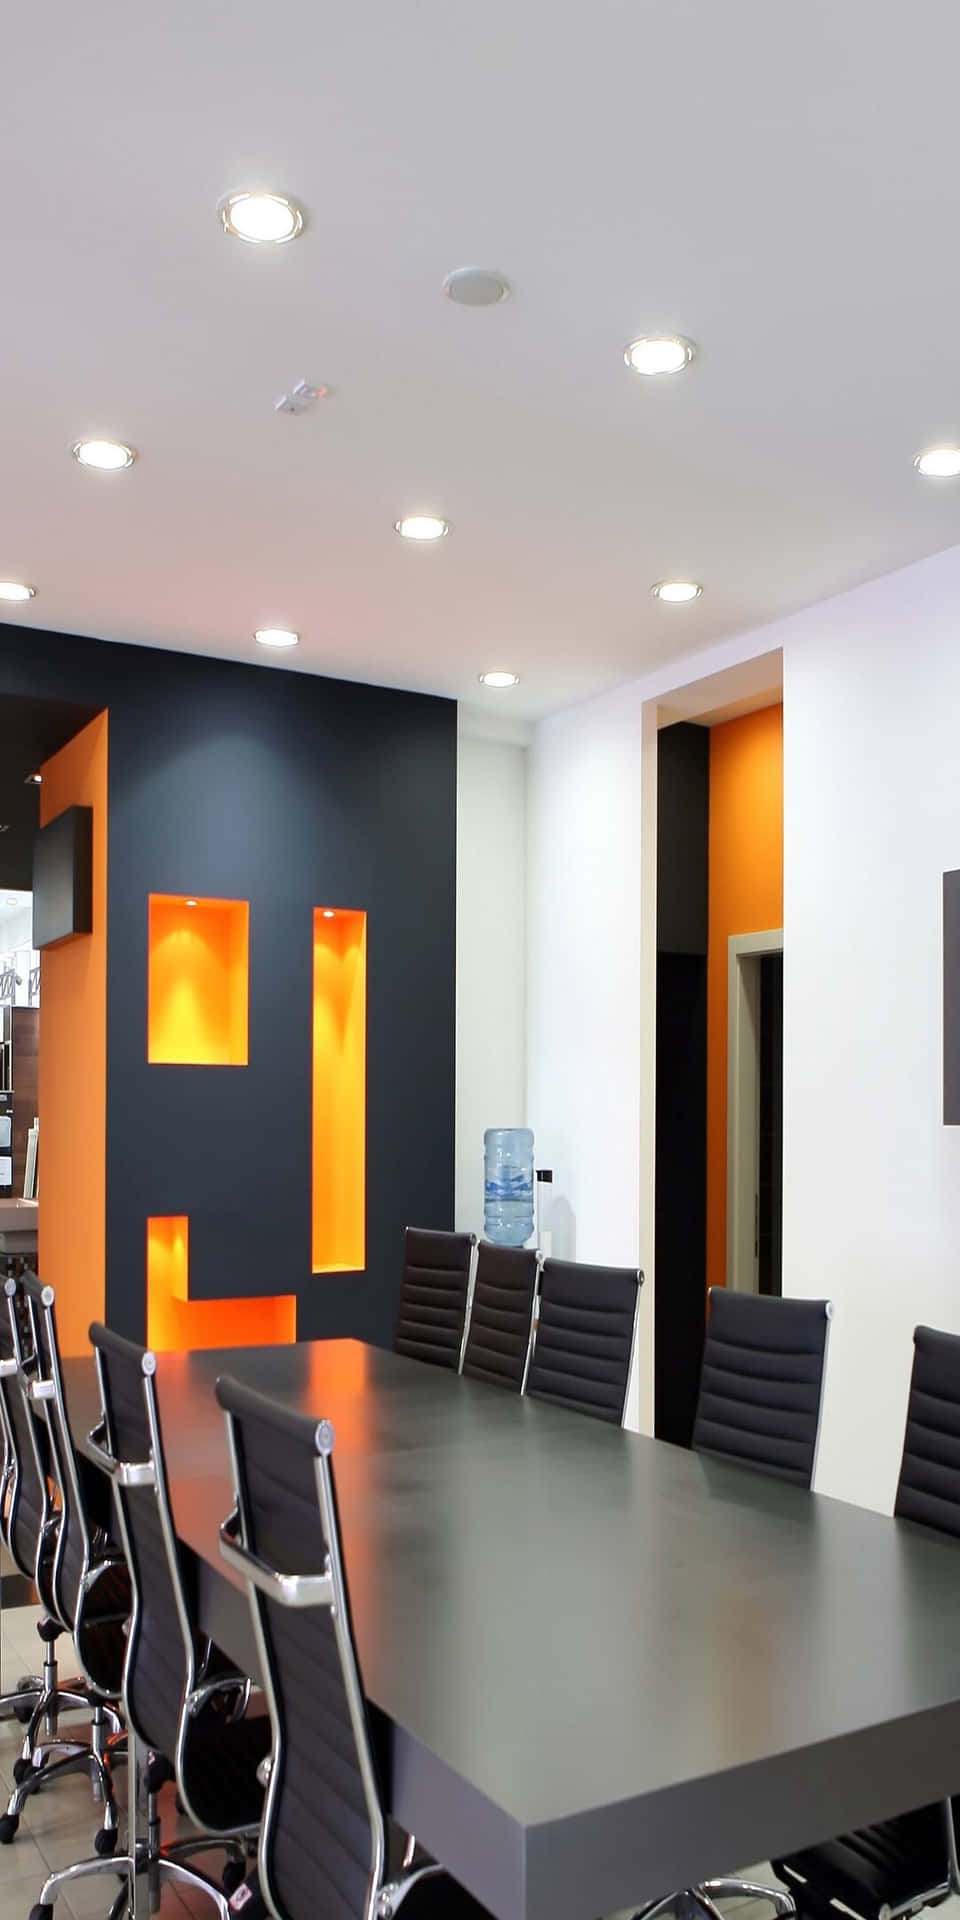 A Conference Room With Orange Walls And Black Chairs